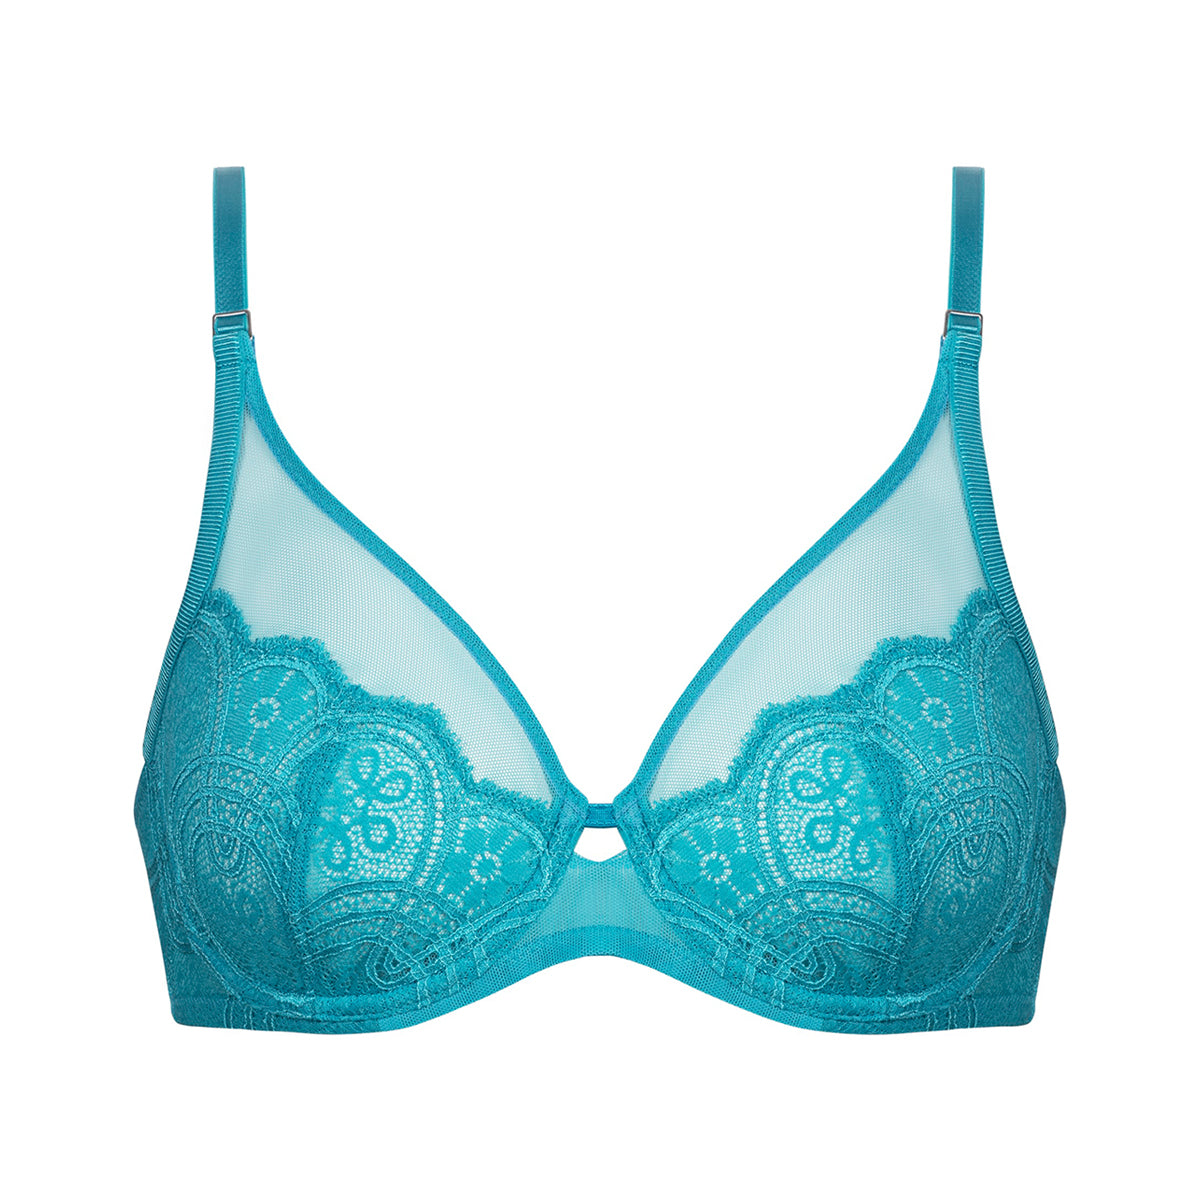 Buy Handmade Brand New Bra in Blue Color, Bra Has a Deep Cup Style